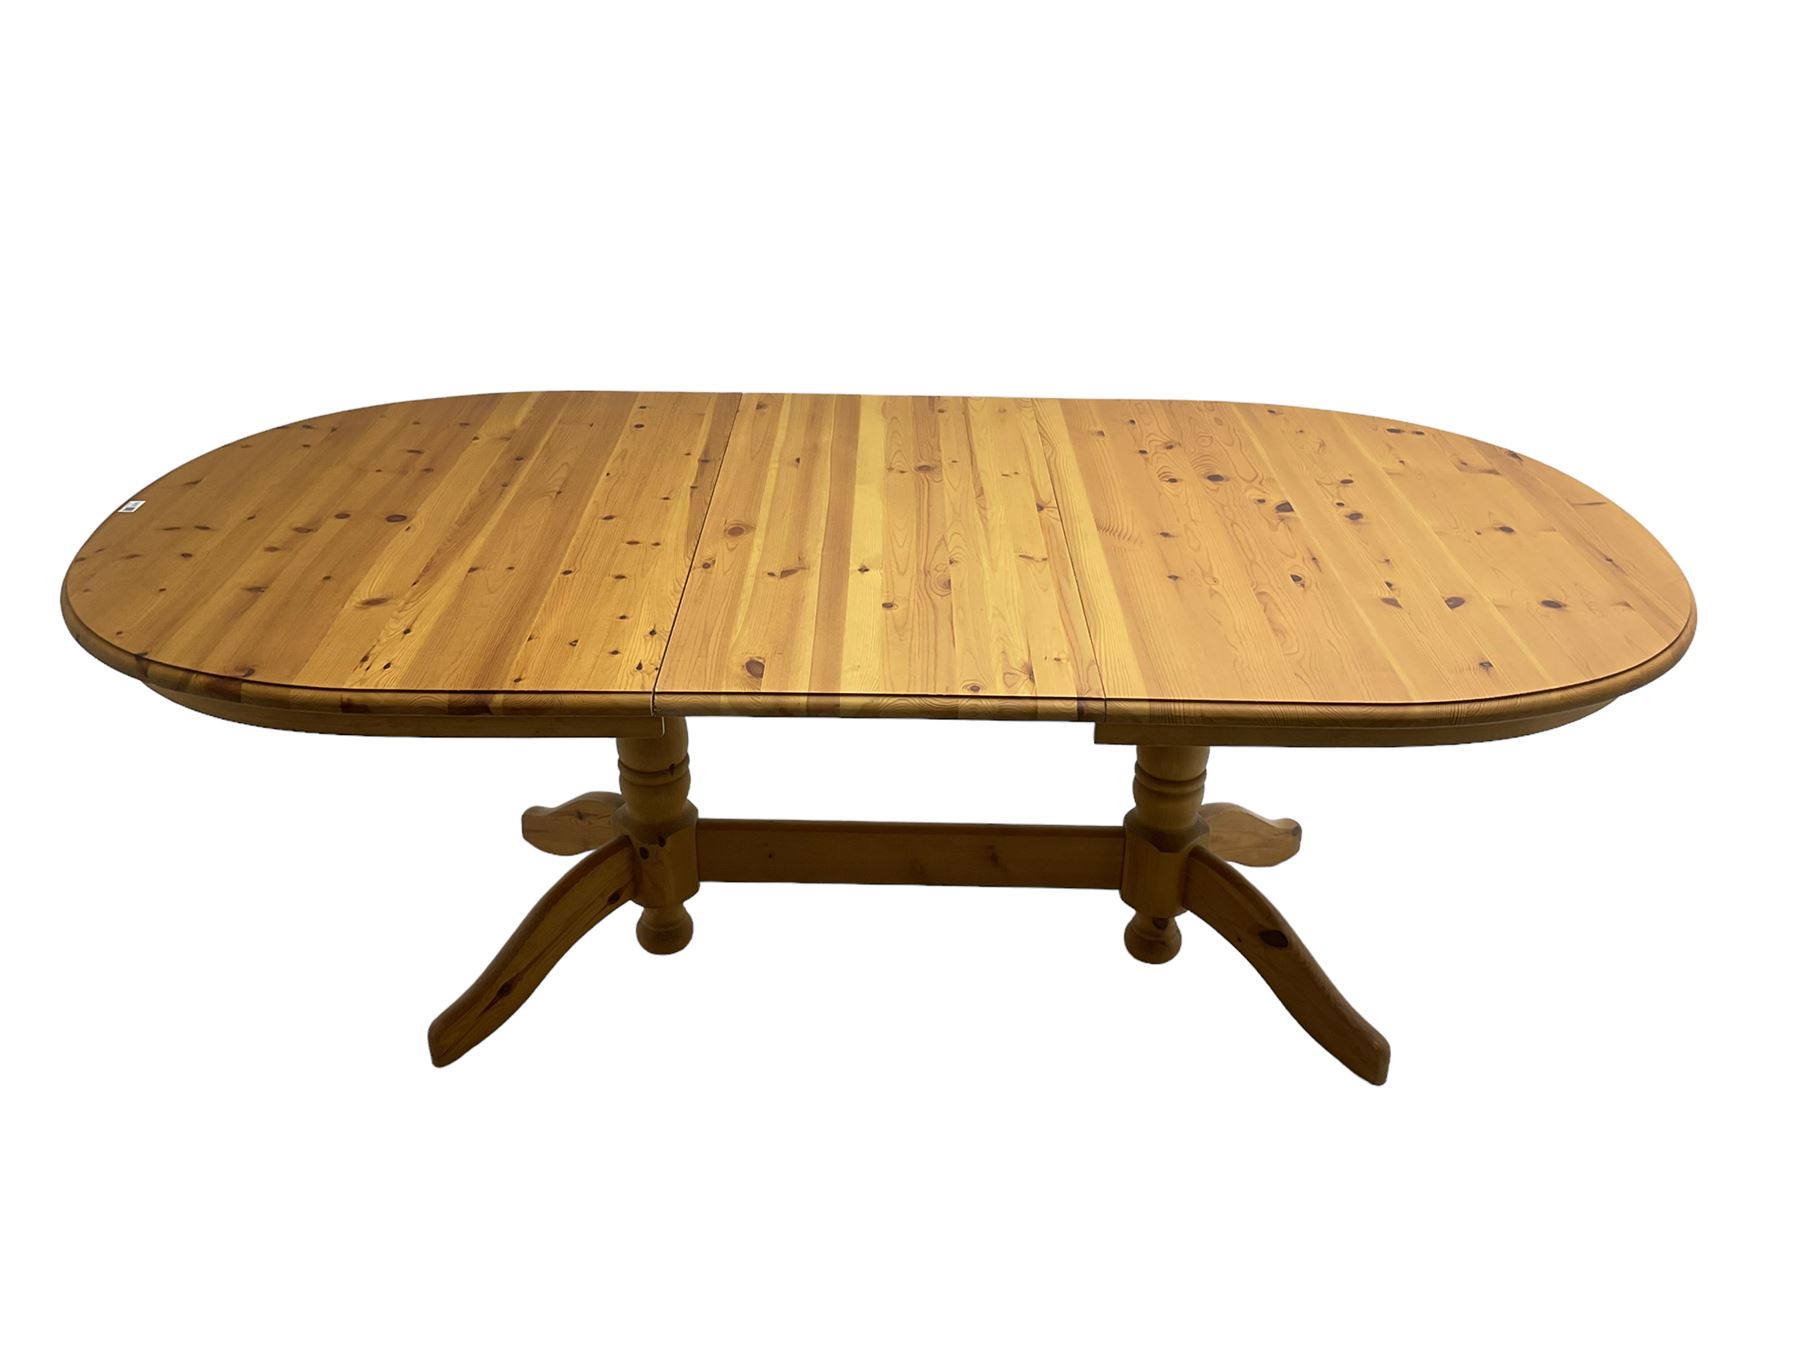 Pine extending dining table with additional leaf - Image 2 of 7